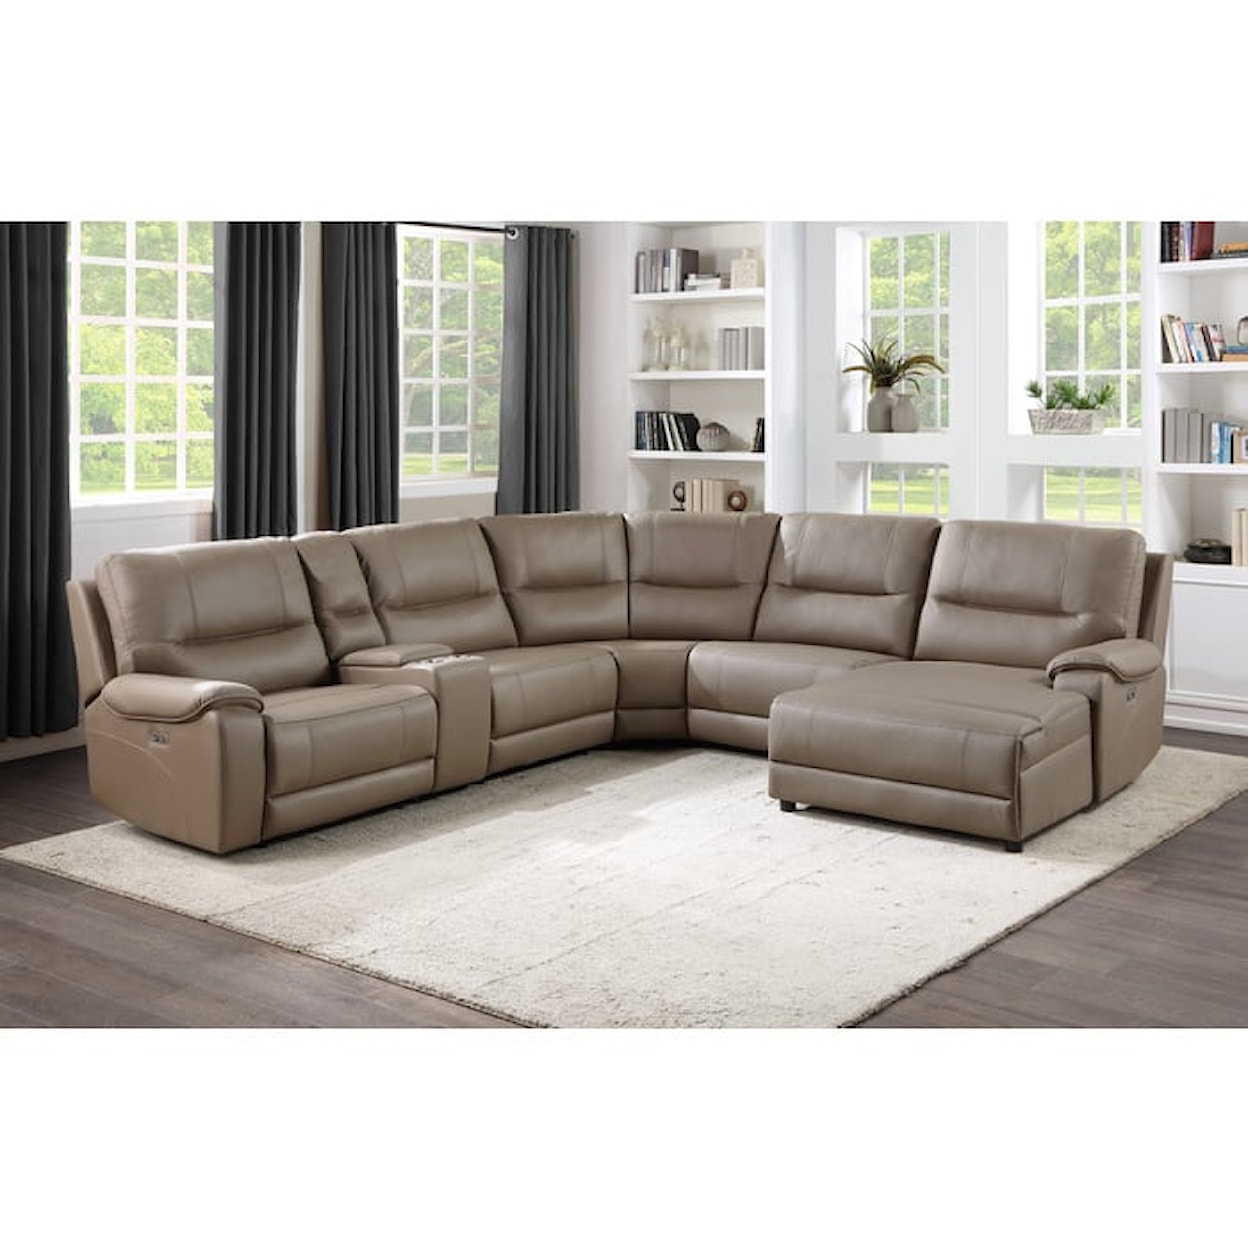 Homelegance LeGrande Power Right Side Reclining Chaise